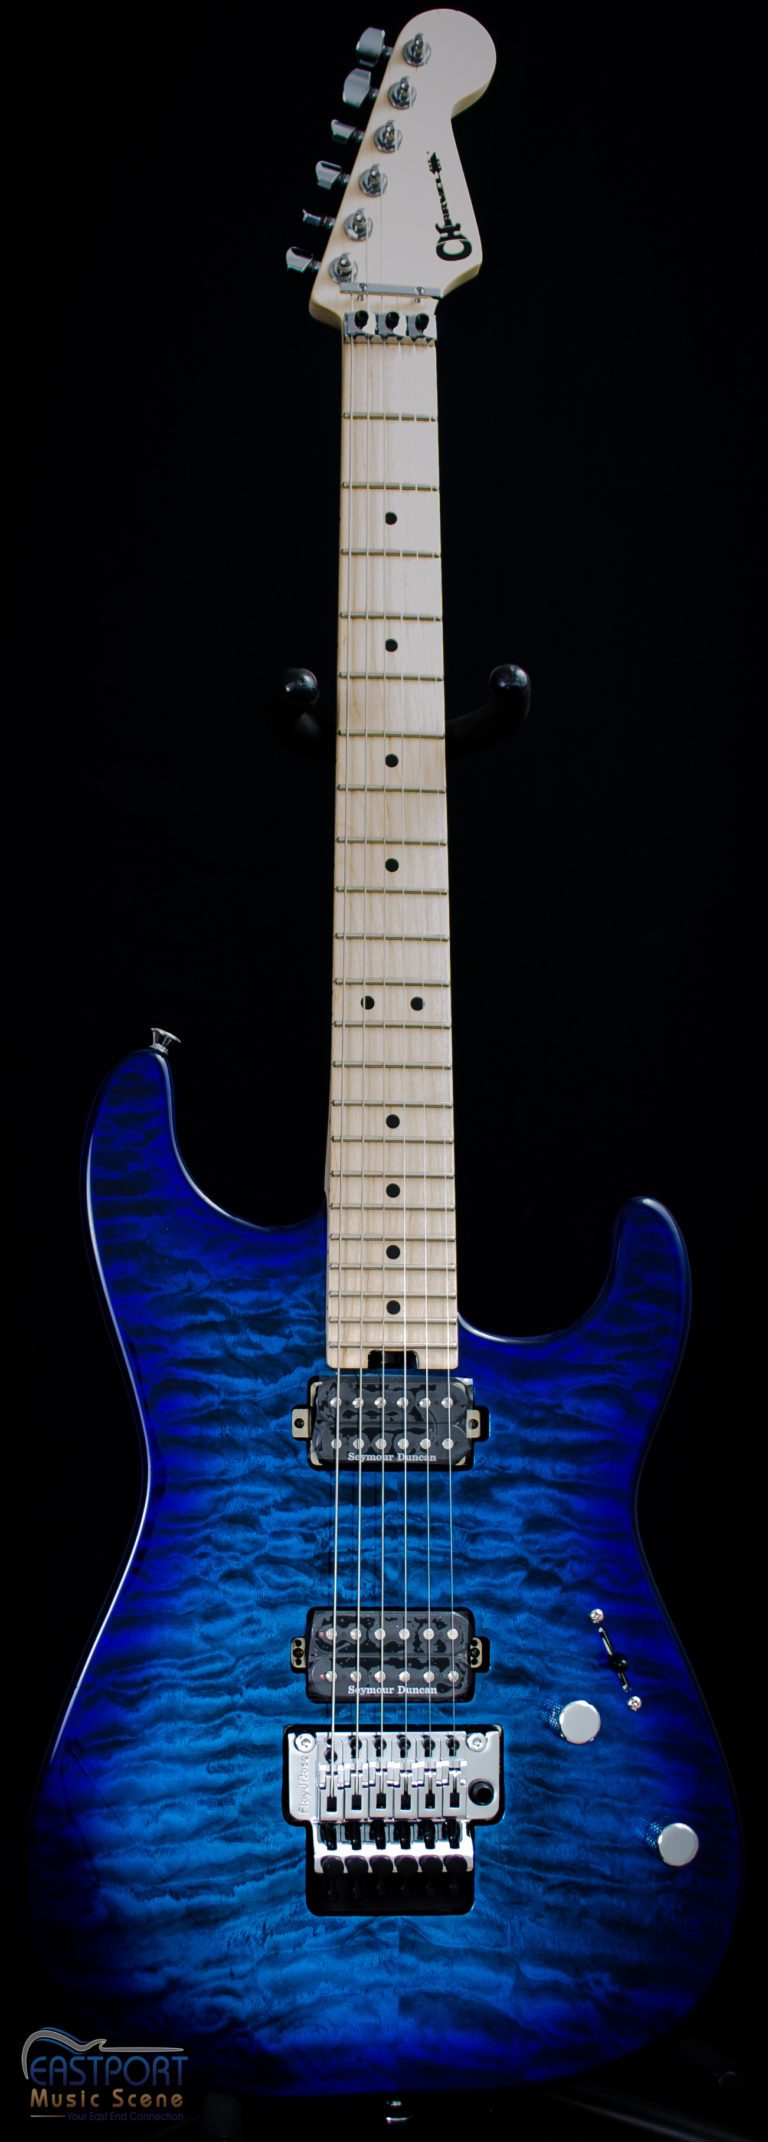 A blue electric guitar with white strings and black body.